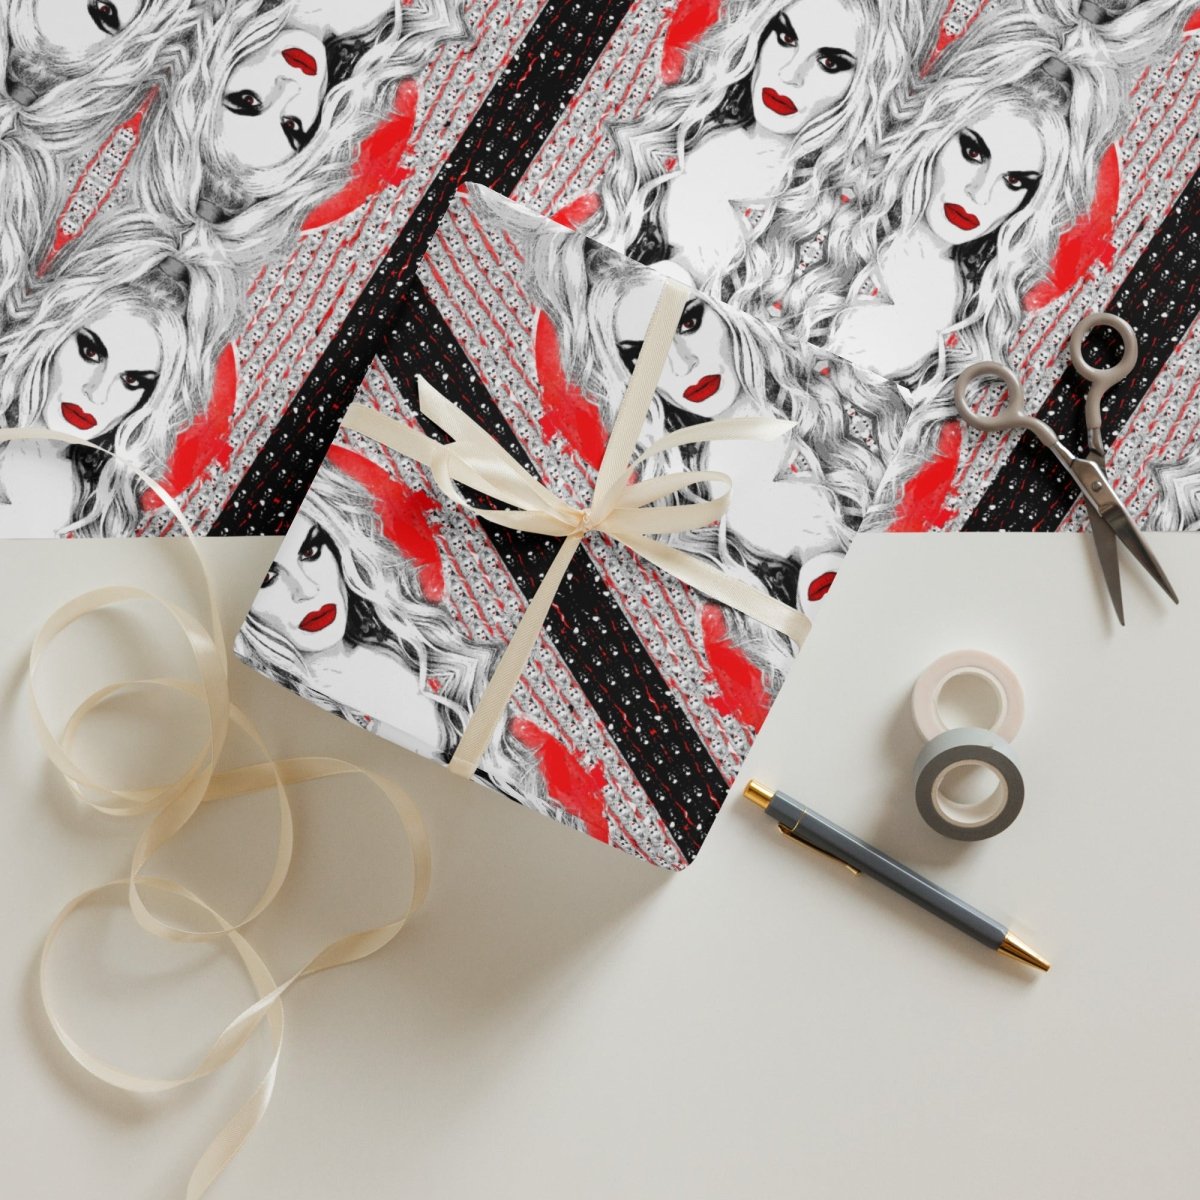 Katya - Pattern Wrapping paper sheets - dragqueenmerch